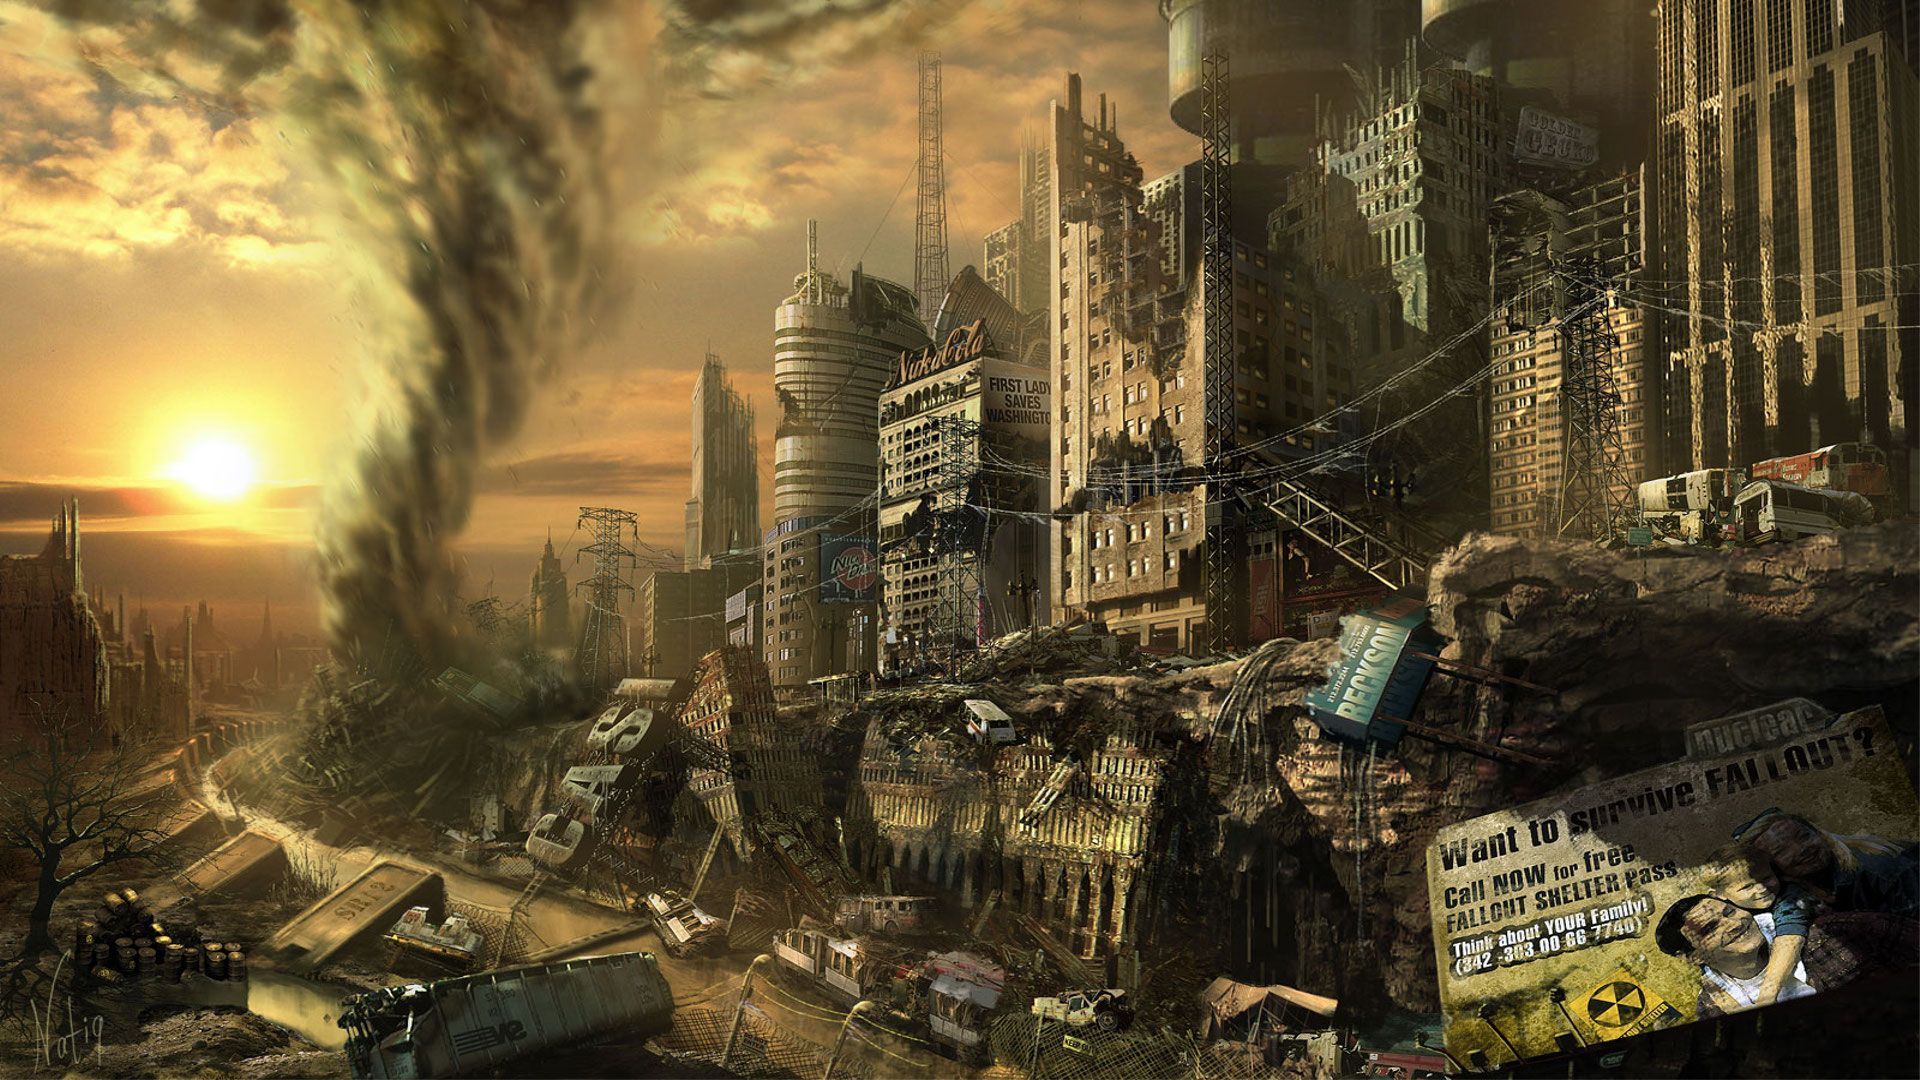 Fallout 3 Wallpapers High Definition, Beautiful Wallpapers - Earth After World War 3 , HD Wallpaper & Backgrounds